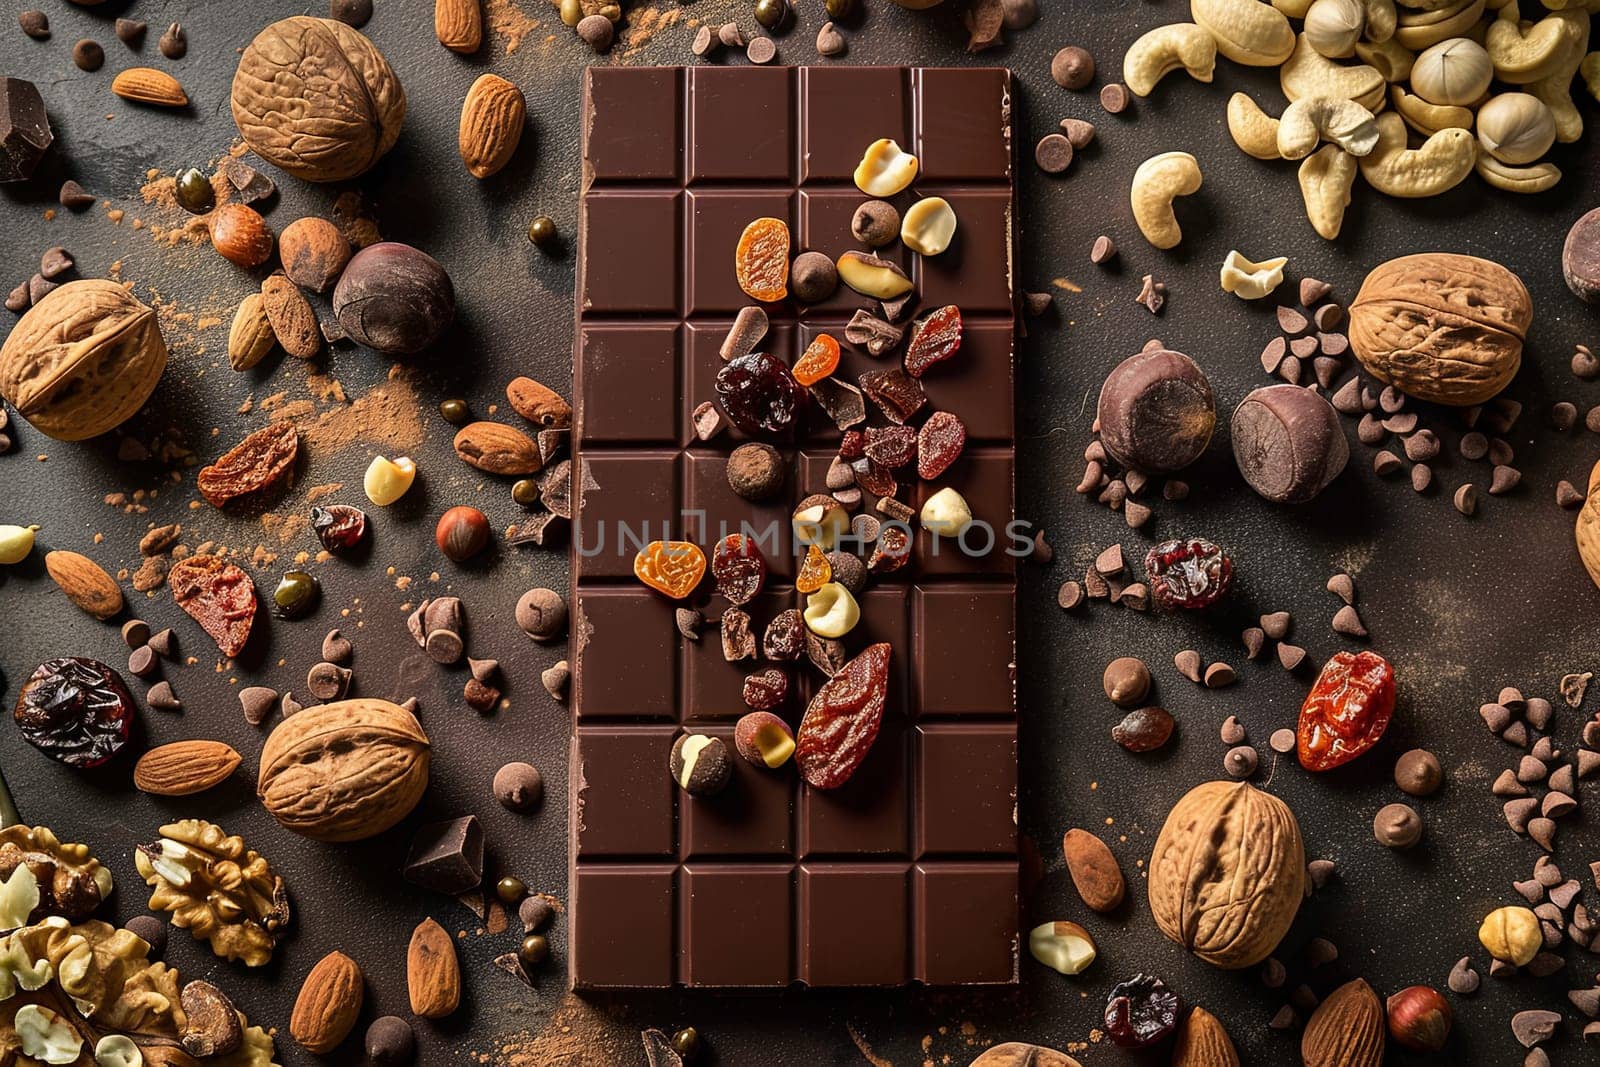 A luxurious chocolate bar richly adorned with an assortment of nuts and dried fruits, creating a visually appealing and appetizing display.